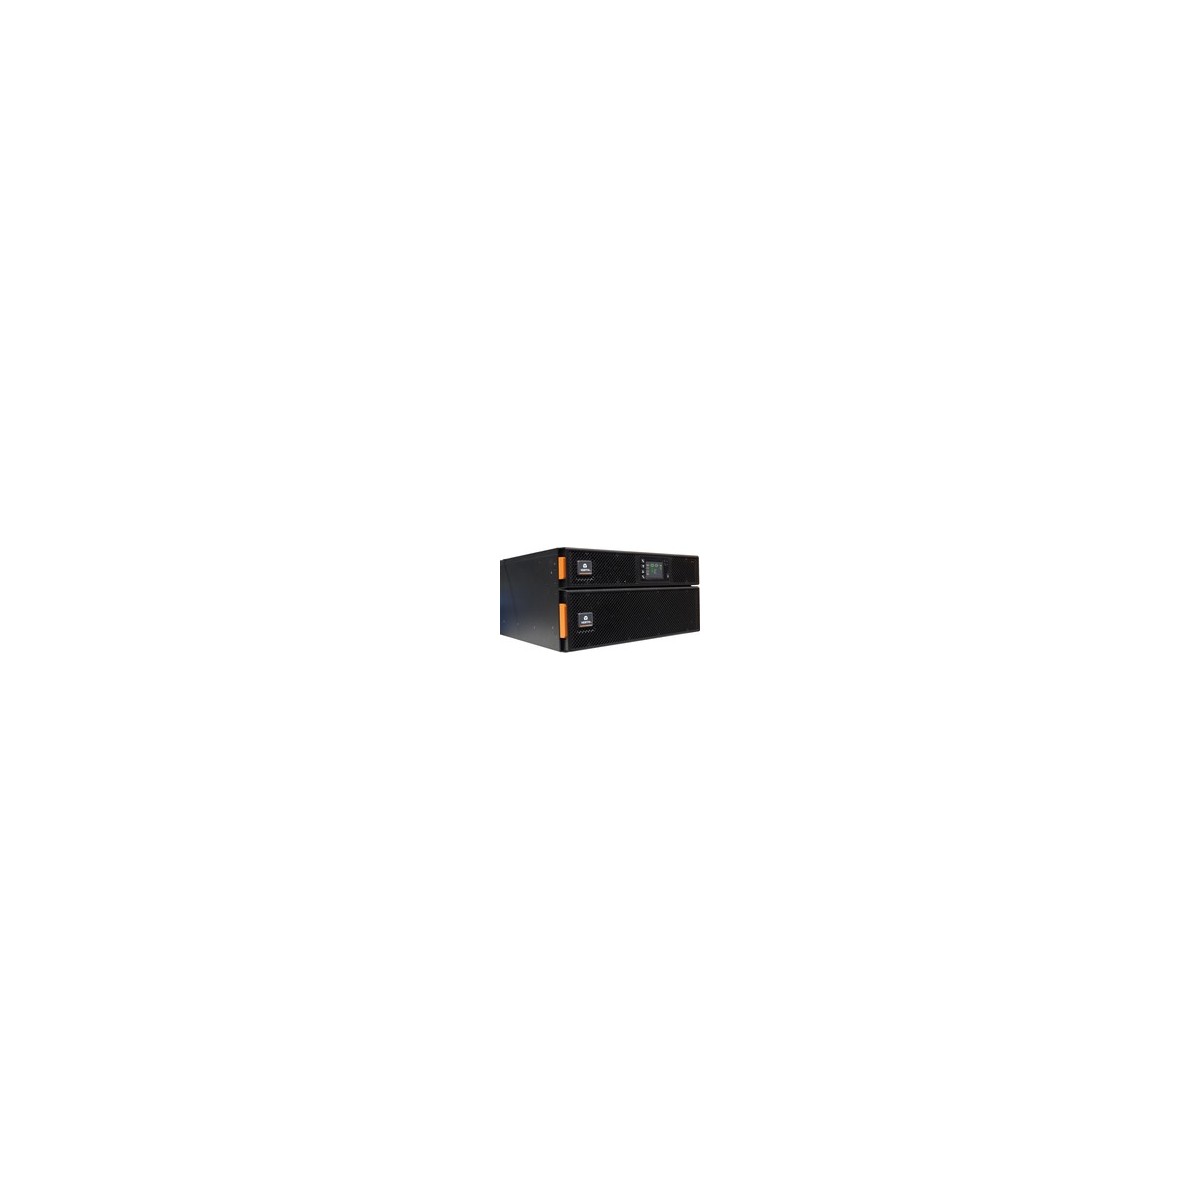 Vertiv GXT5 UPS - 6000VA-6000W| 230V| Rack-Tower Mountable| Energy Star| Online Double Conversion | 5U| Color-Graphic LCD| 2-Yea